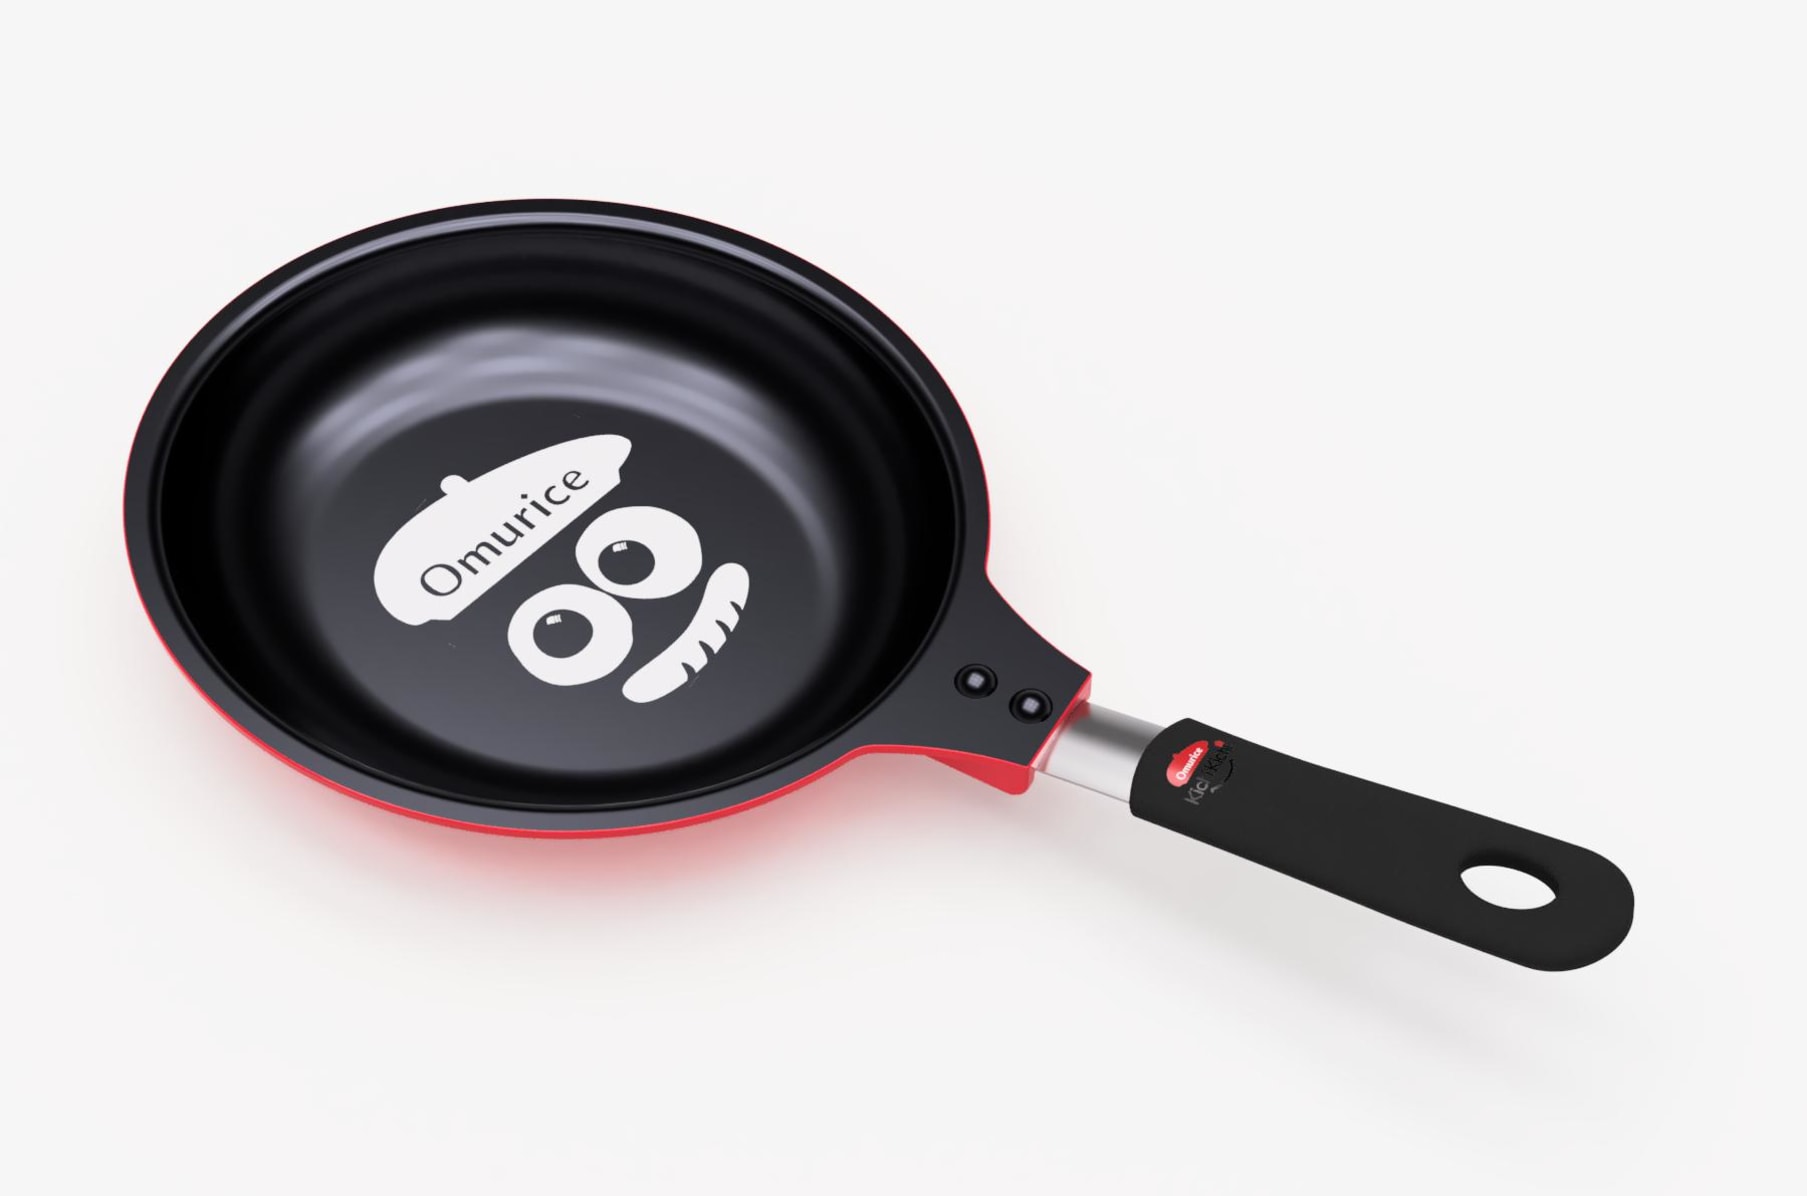 From Kyoto Japan - The Ultimate Omelet Pan | Indiegogo